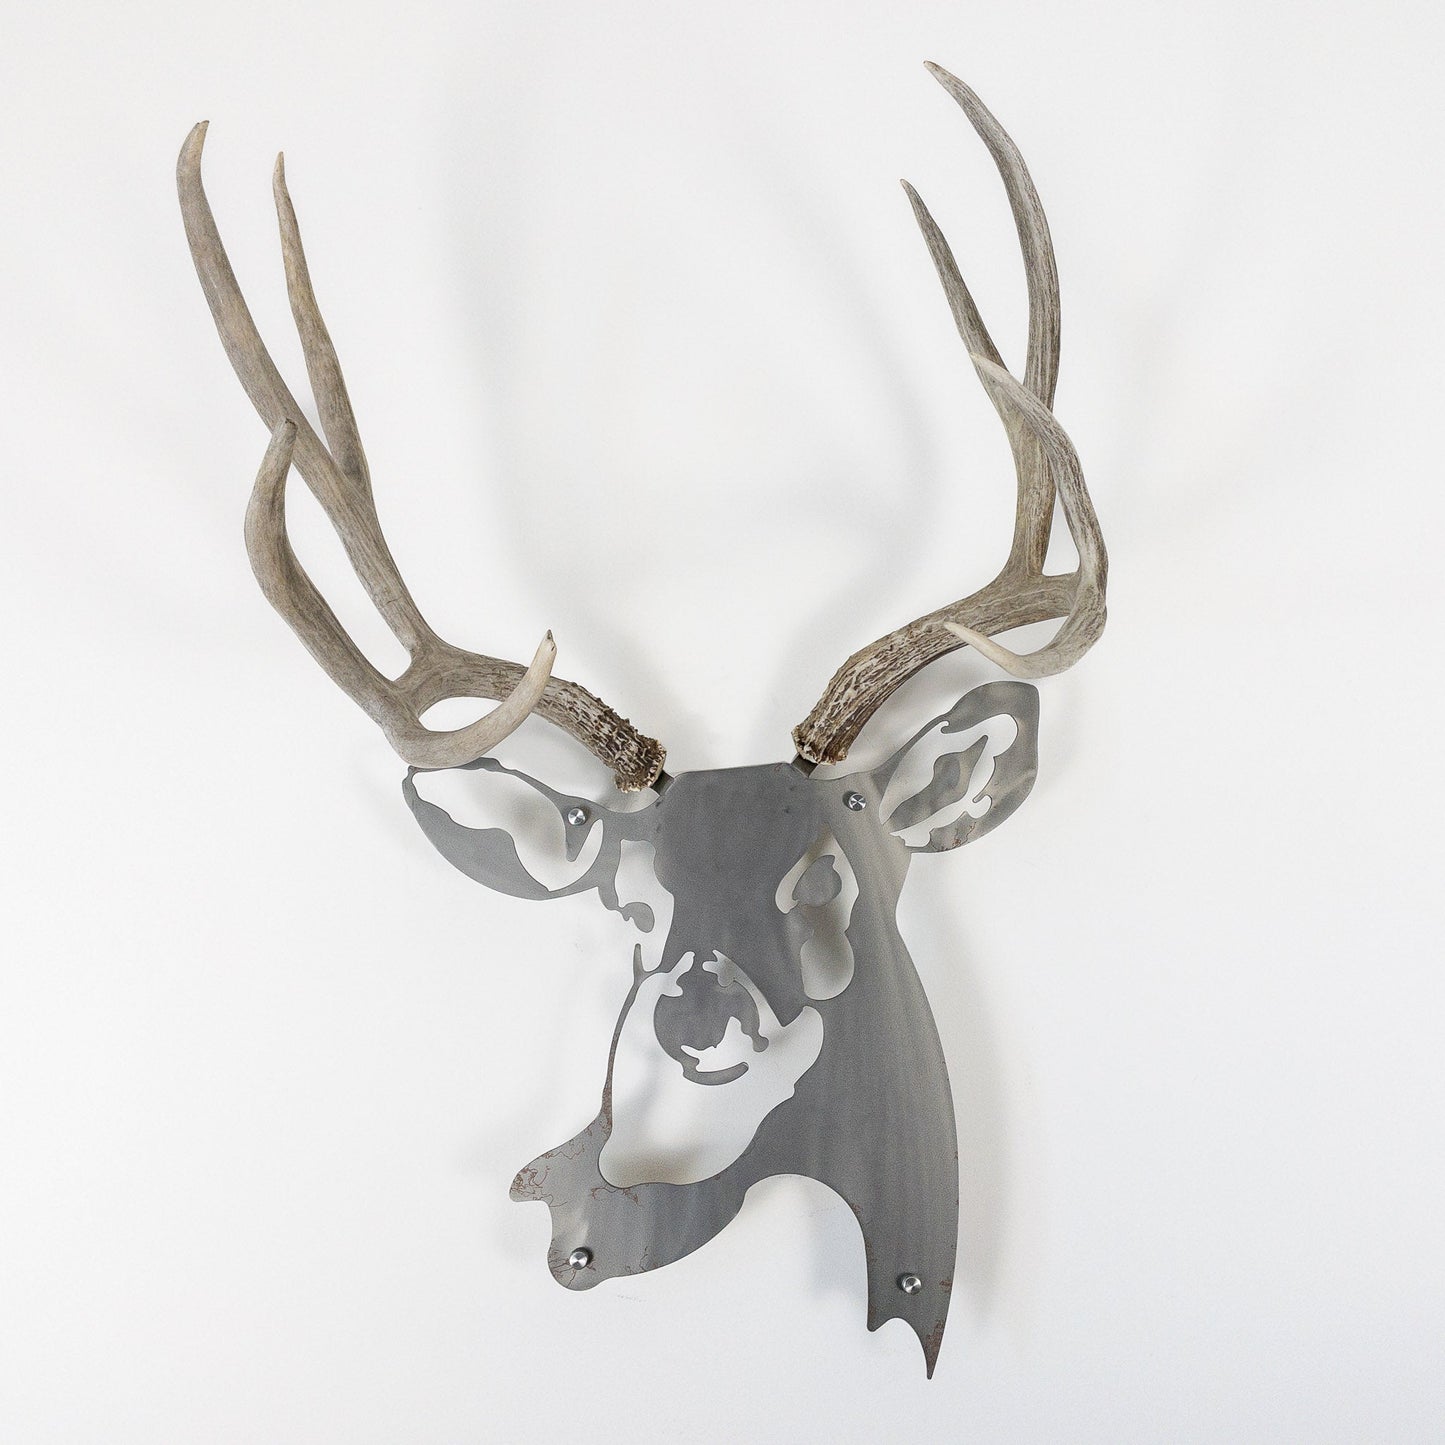 A metal wall decor made from real shed  Mule Deer antlers mounted on a metal head